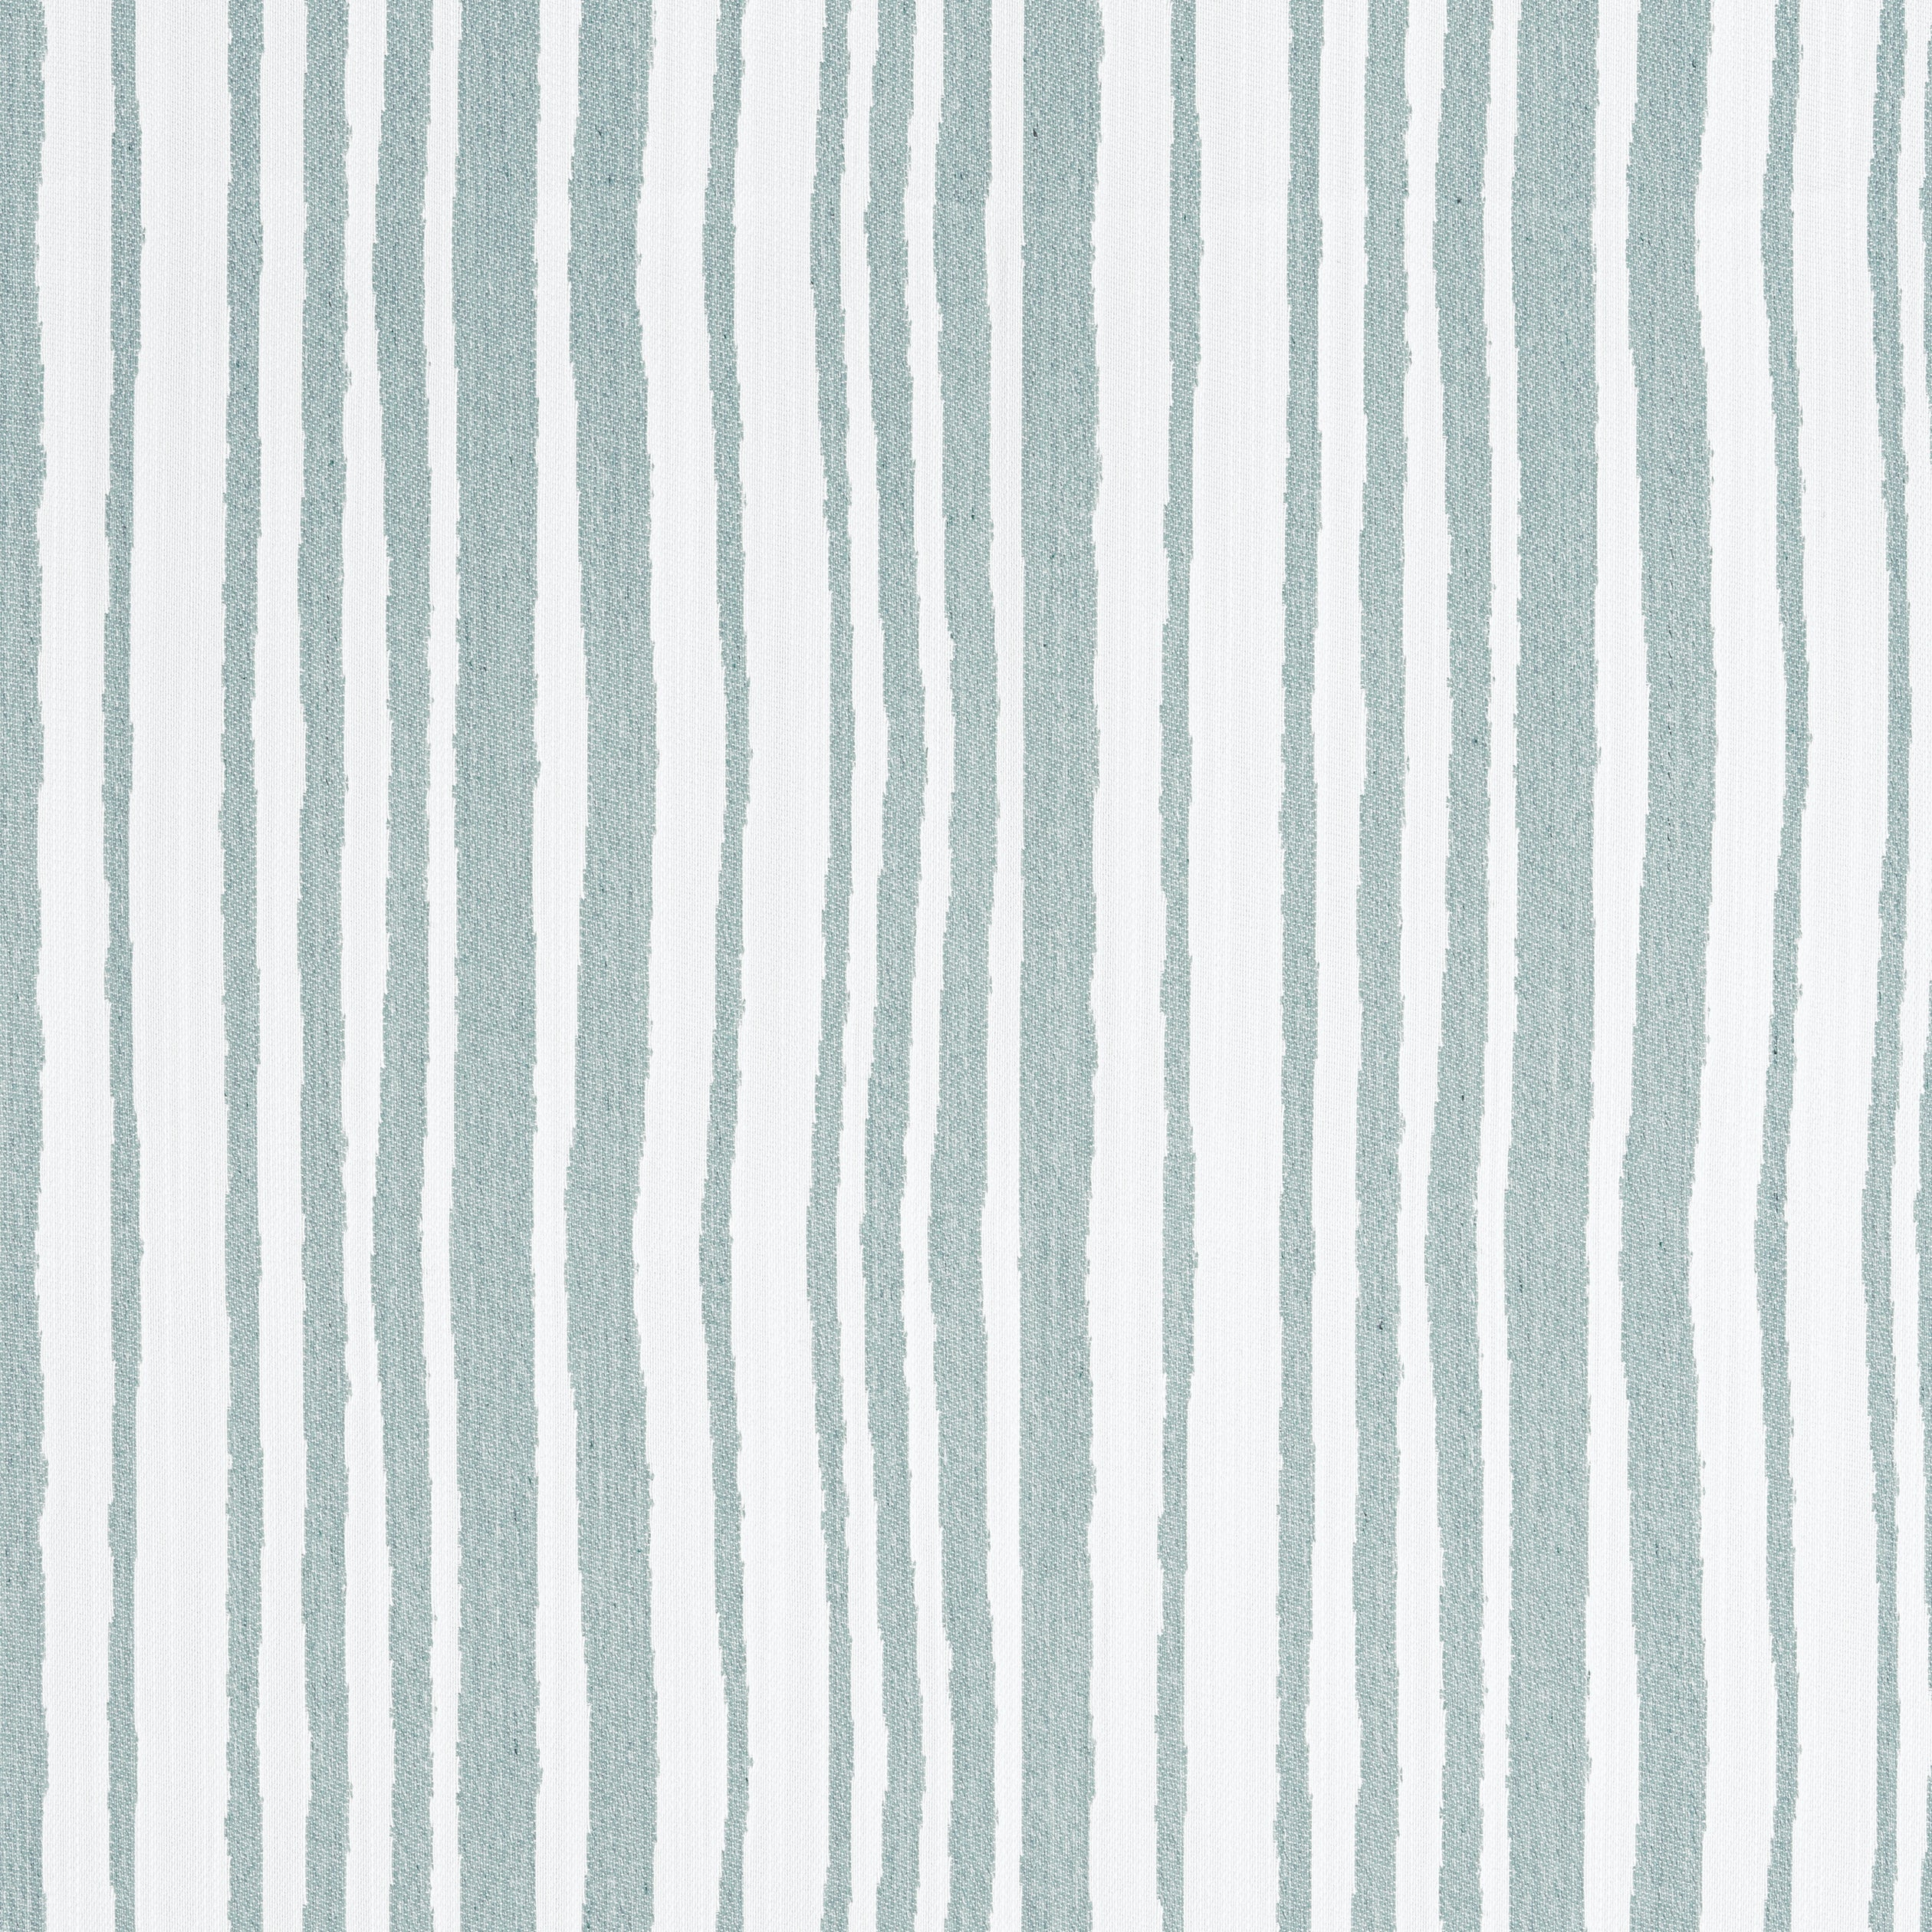 Pintado Stripe fabric in seafoam color - pattern number W8502 - by Thibaut in the Villa collection